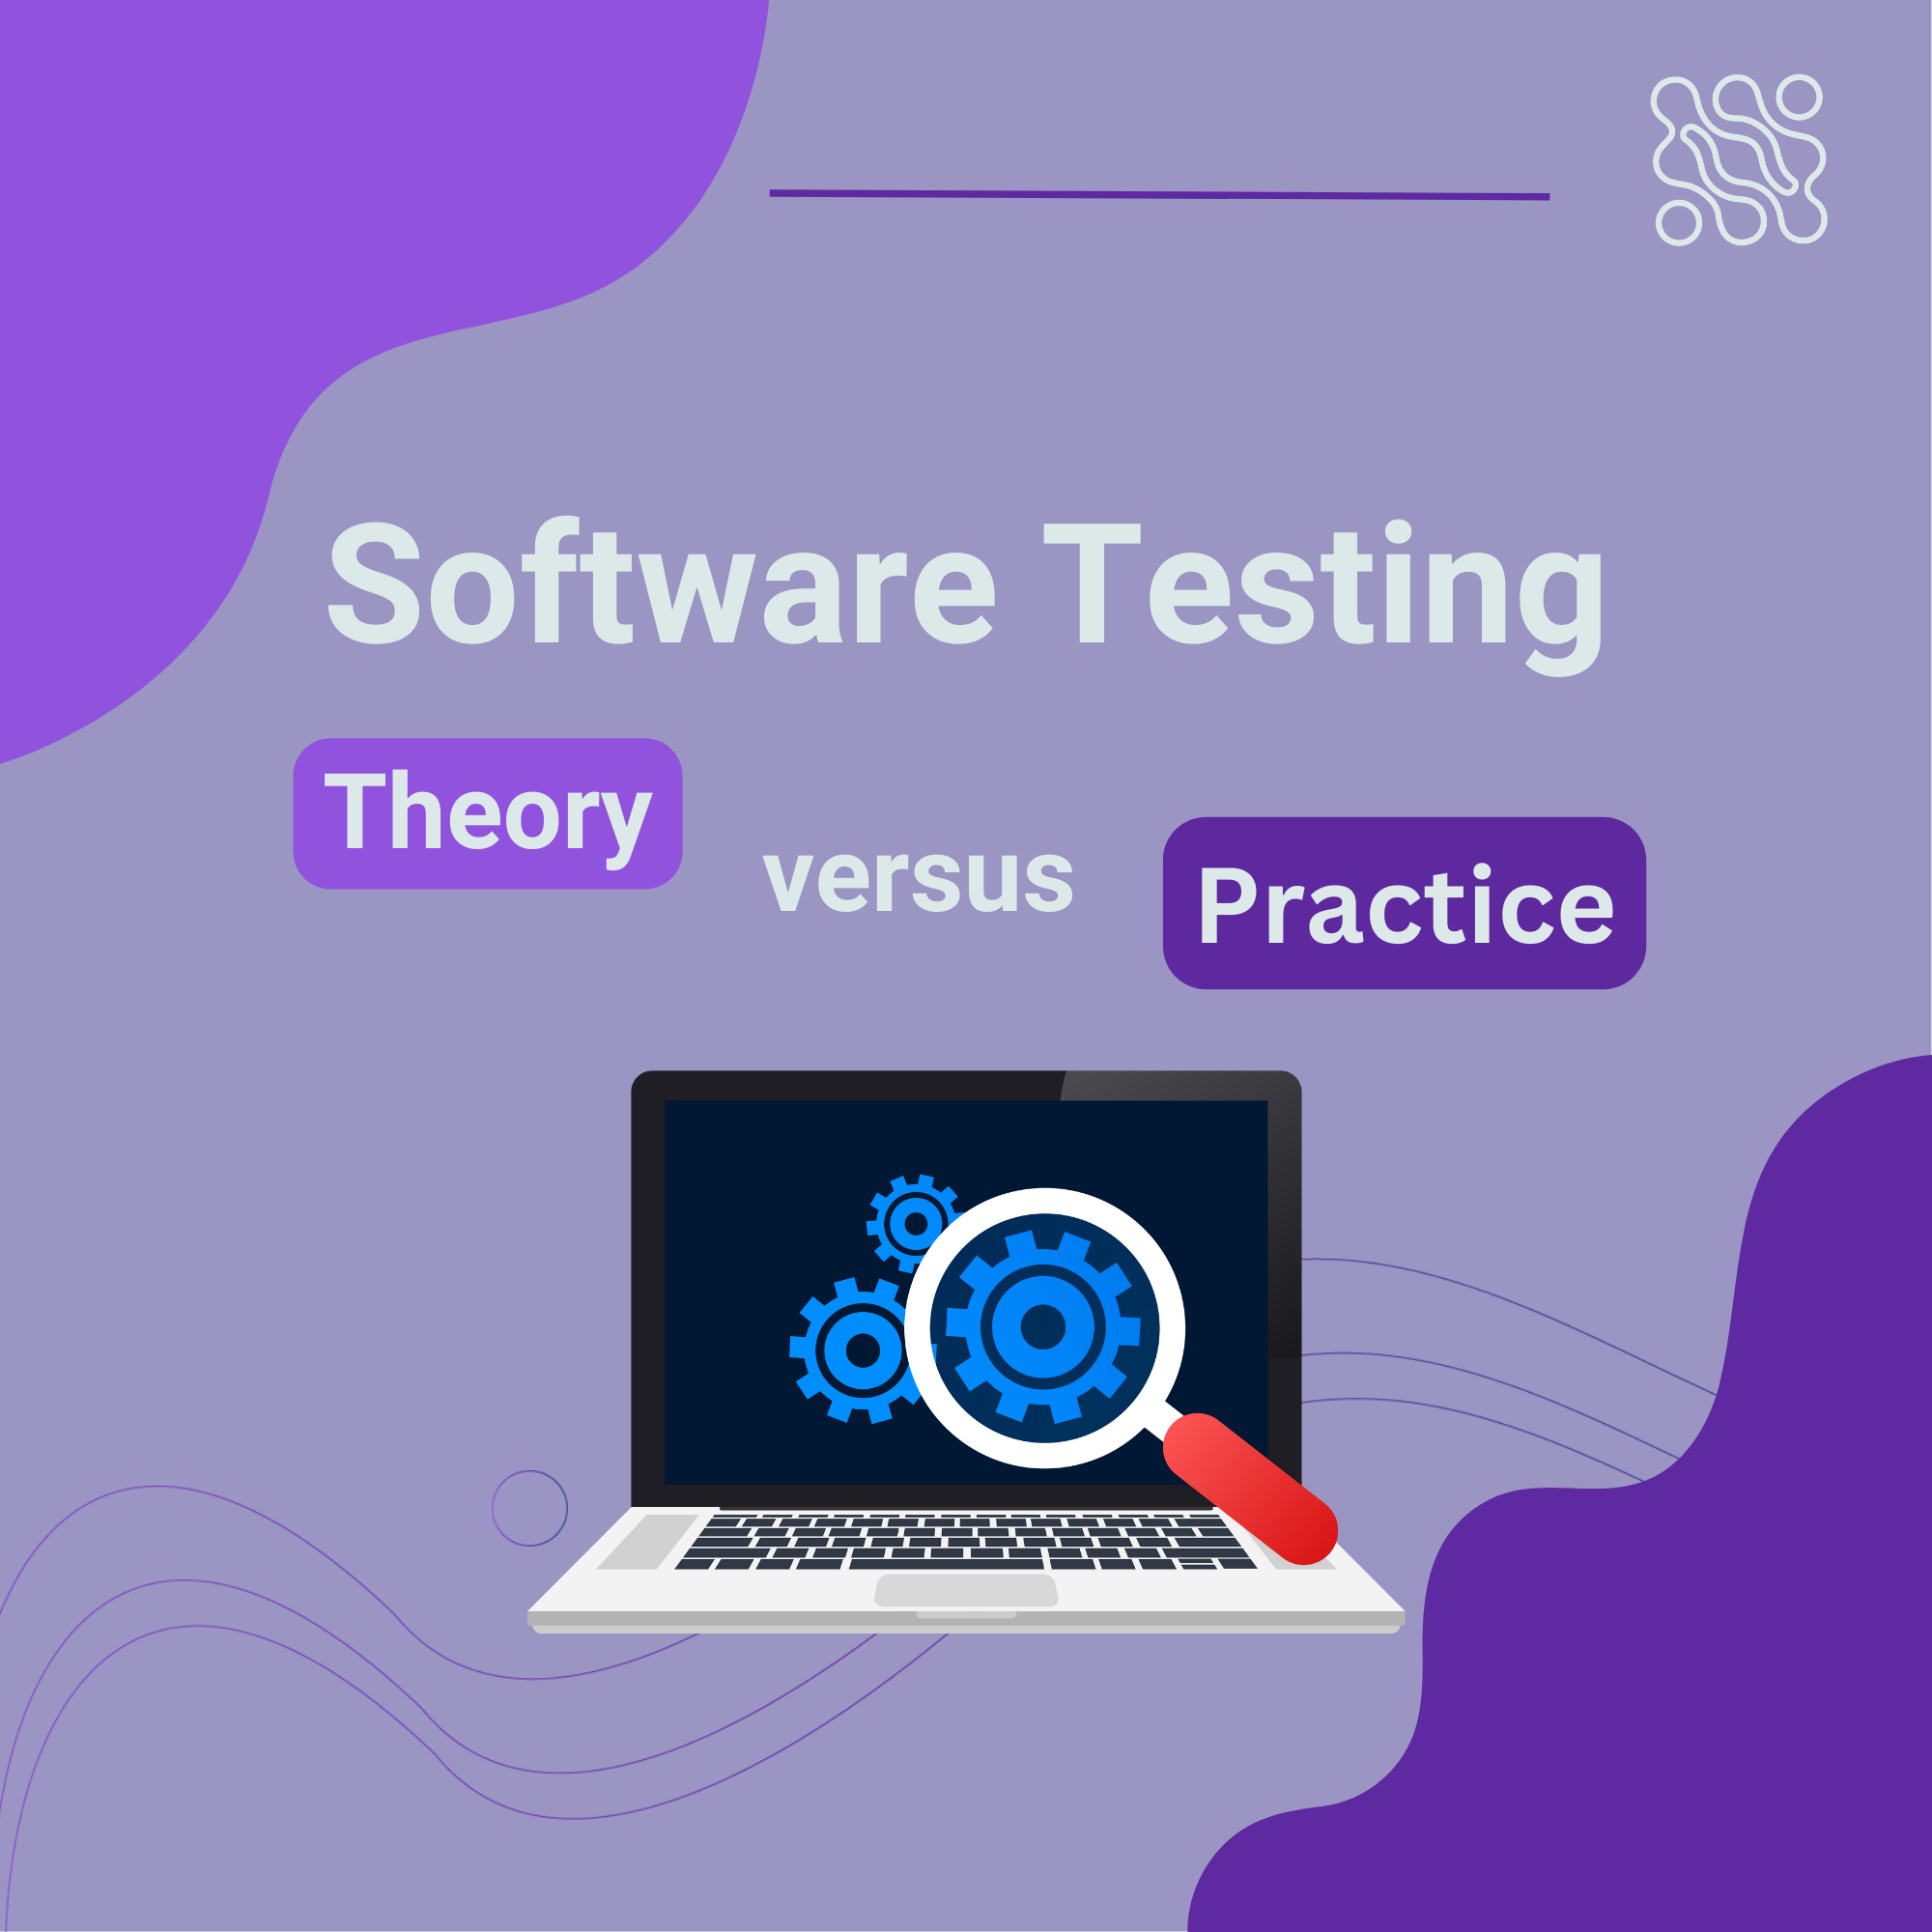 Software Testing Theory versus Practice